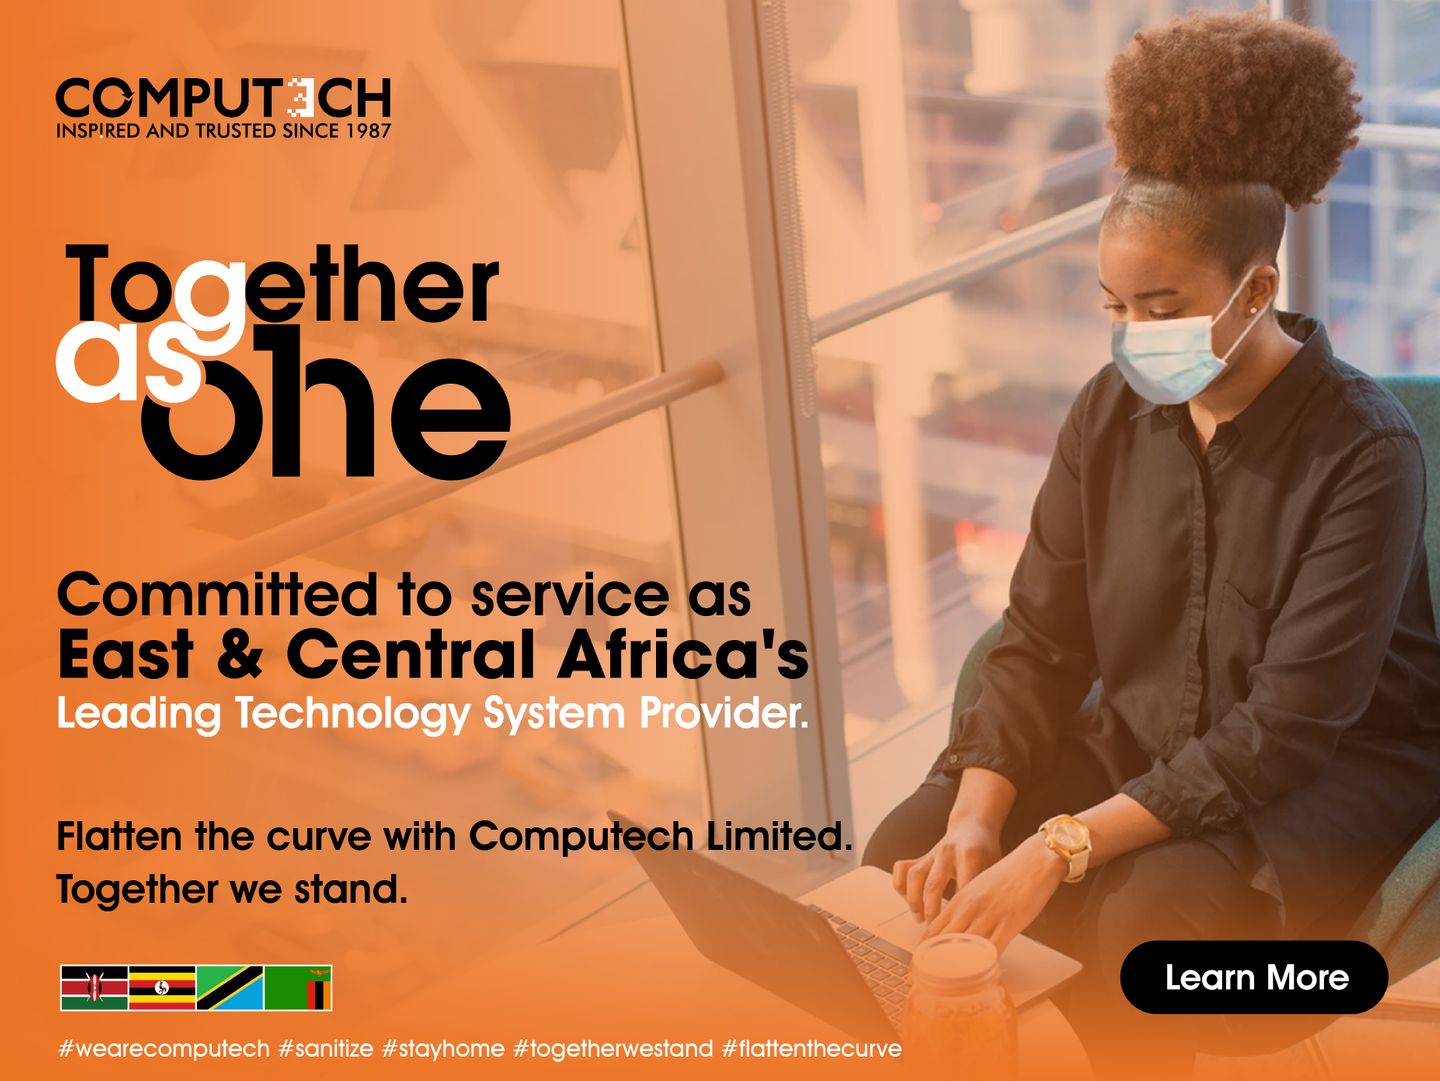 Flatten the Curve with Computech Limited